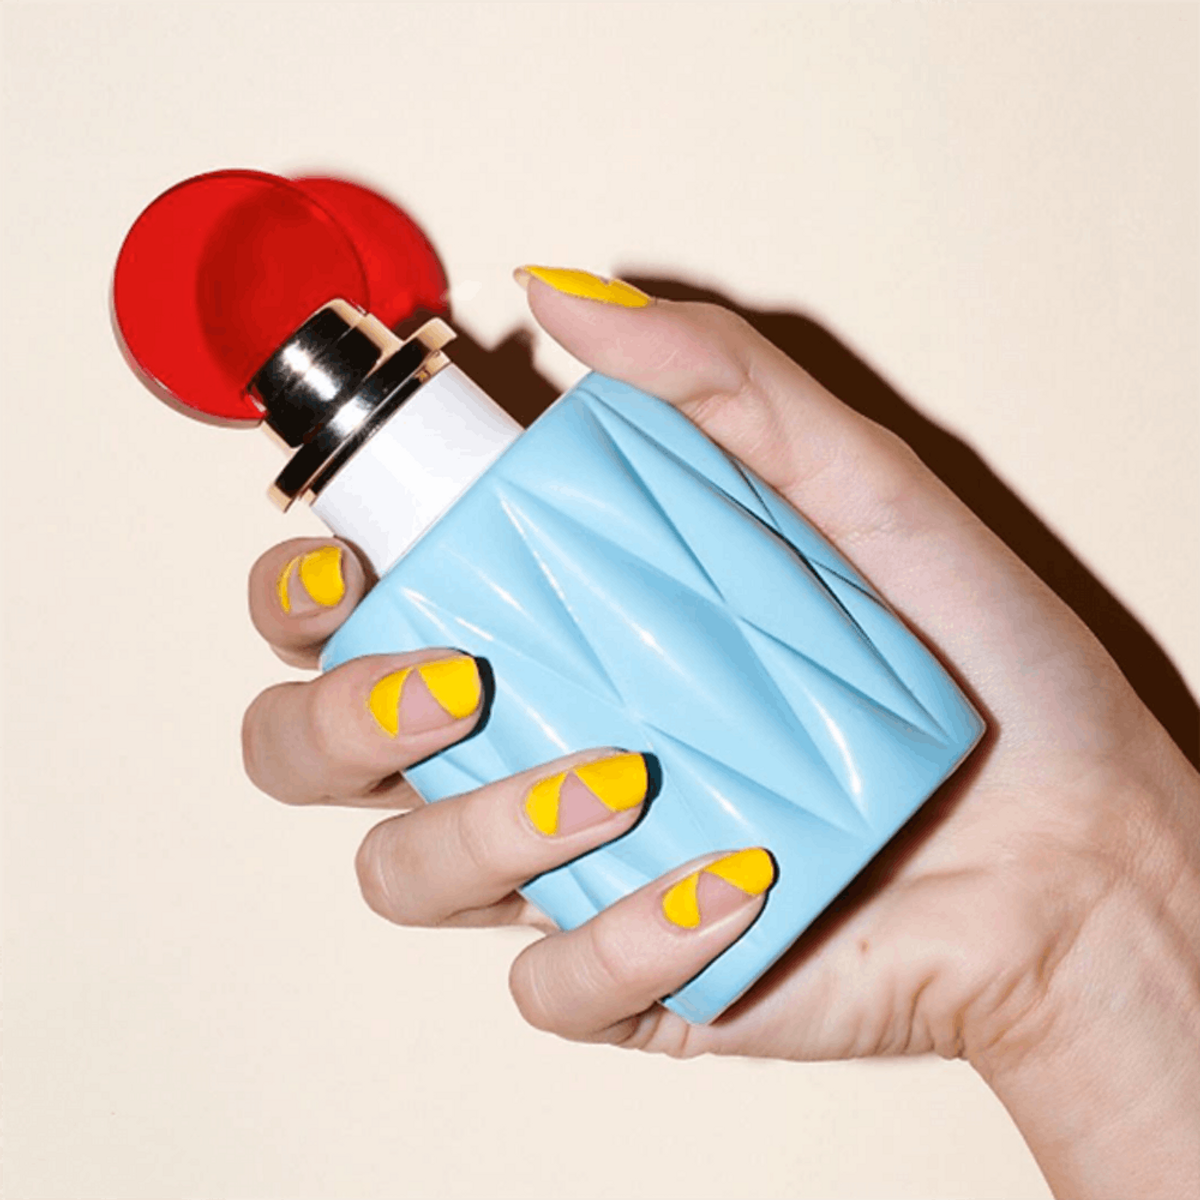 The 5 Nail Polish Colors You Need to Wear This Summer